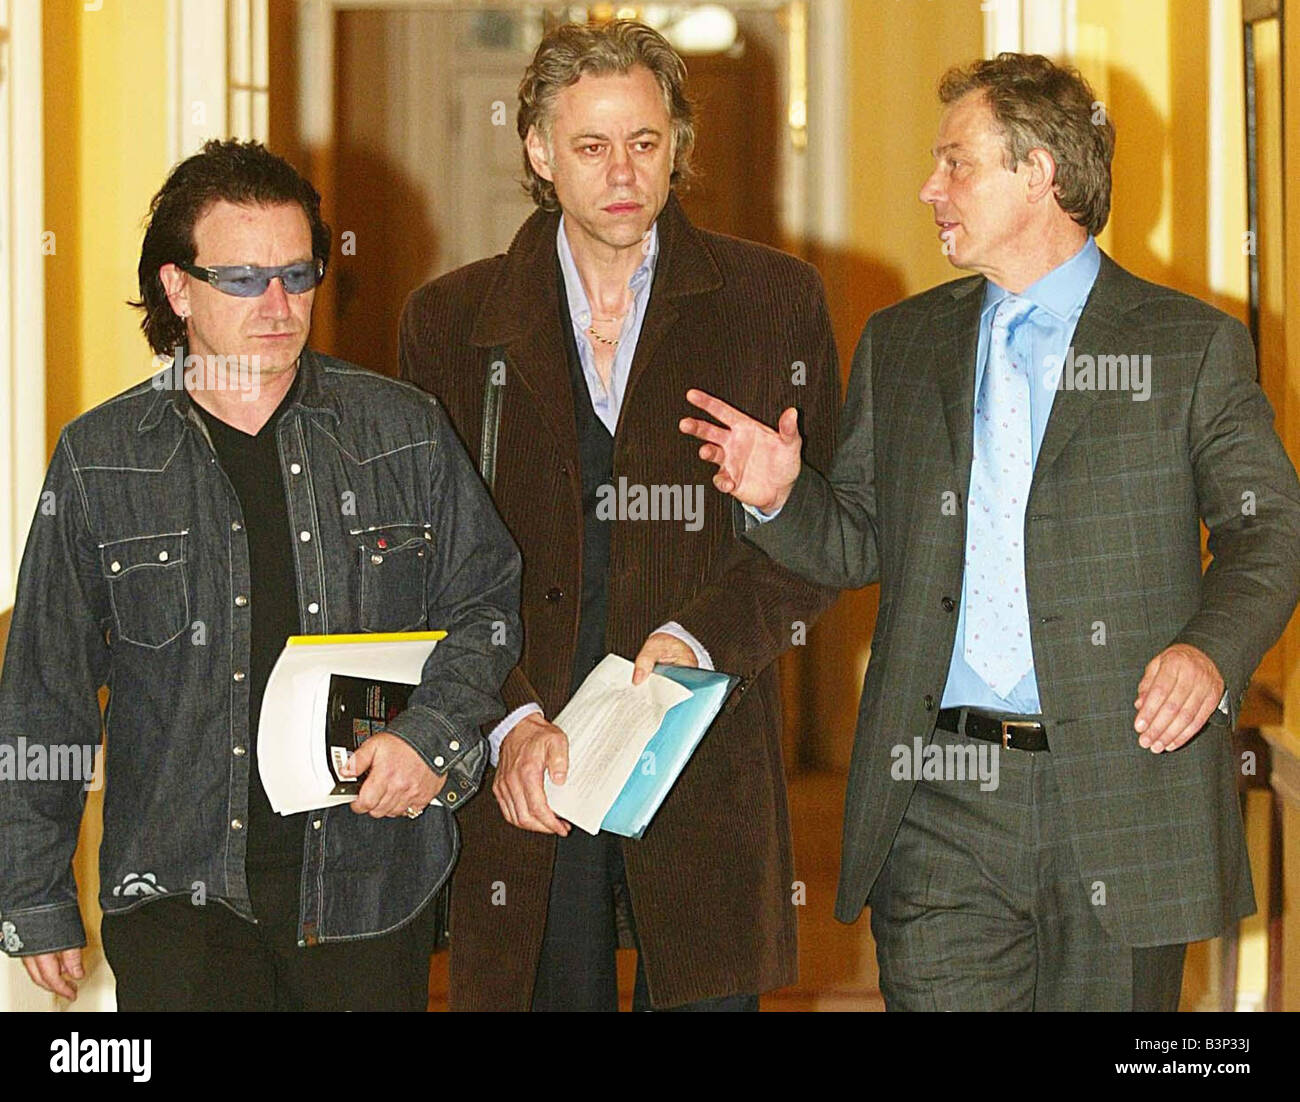 Britain s Prime Minister Tony Blair May 2003 right escorts Sir Bob Geldof center and U2 frontman Bono inside 10 Downing Street London Thursday May 22 2003 Blair met with the rock stars who were urging world leaders to unite in the fight against the AIDS epidemic Stock Photo